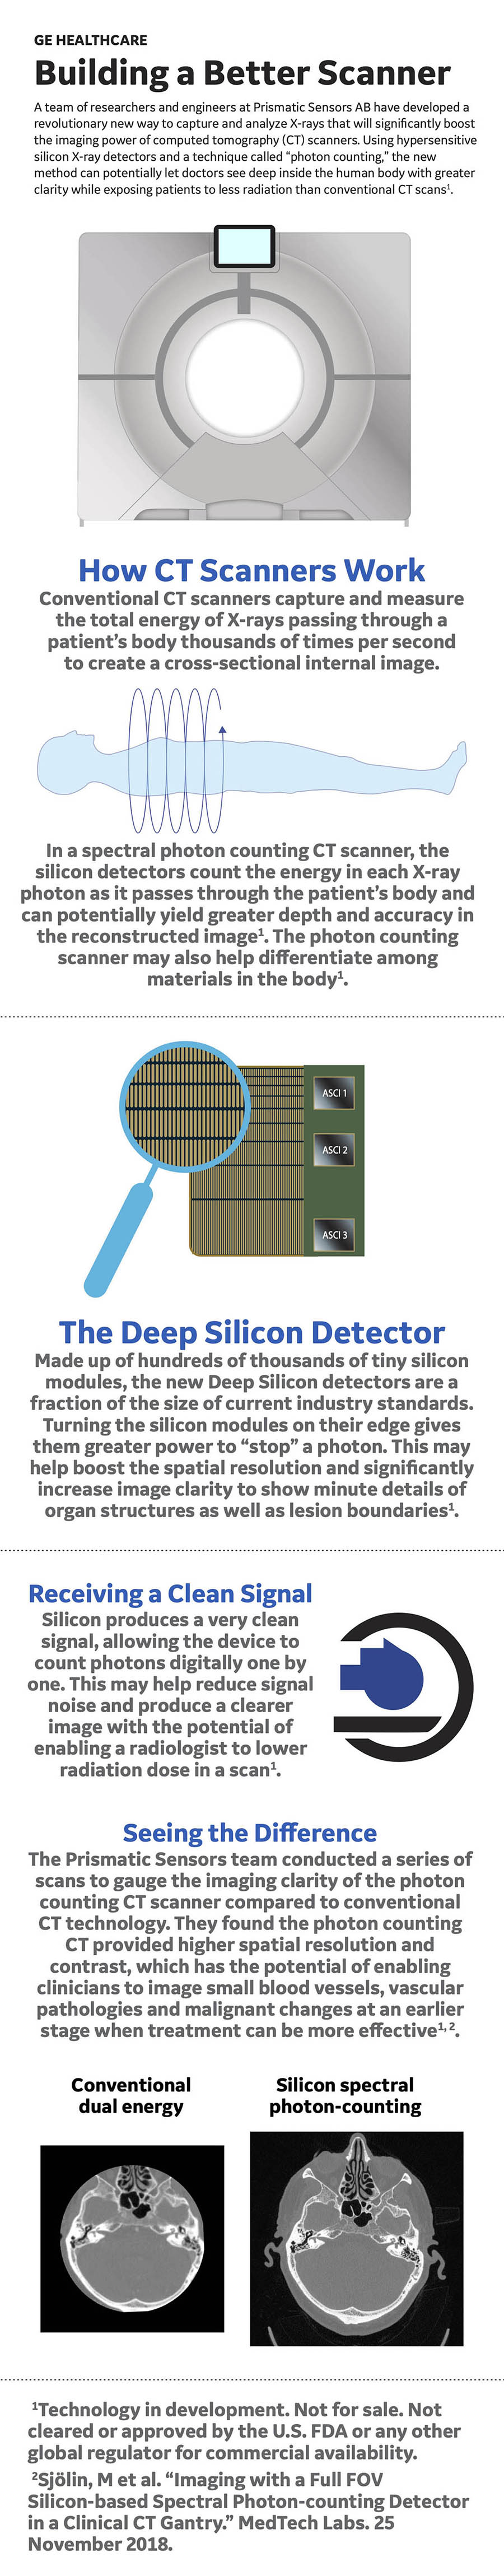 Infographic of the photon-counting scanner